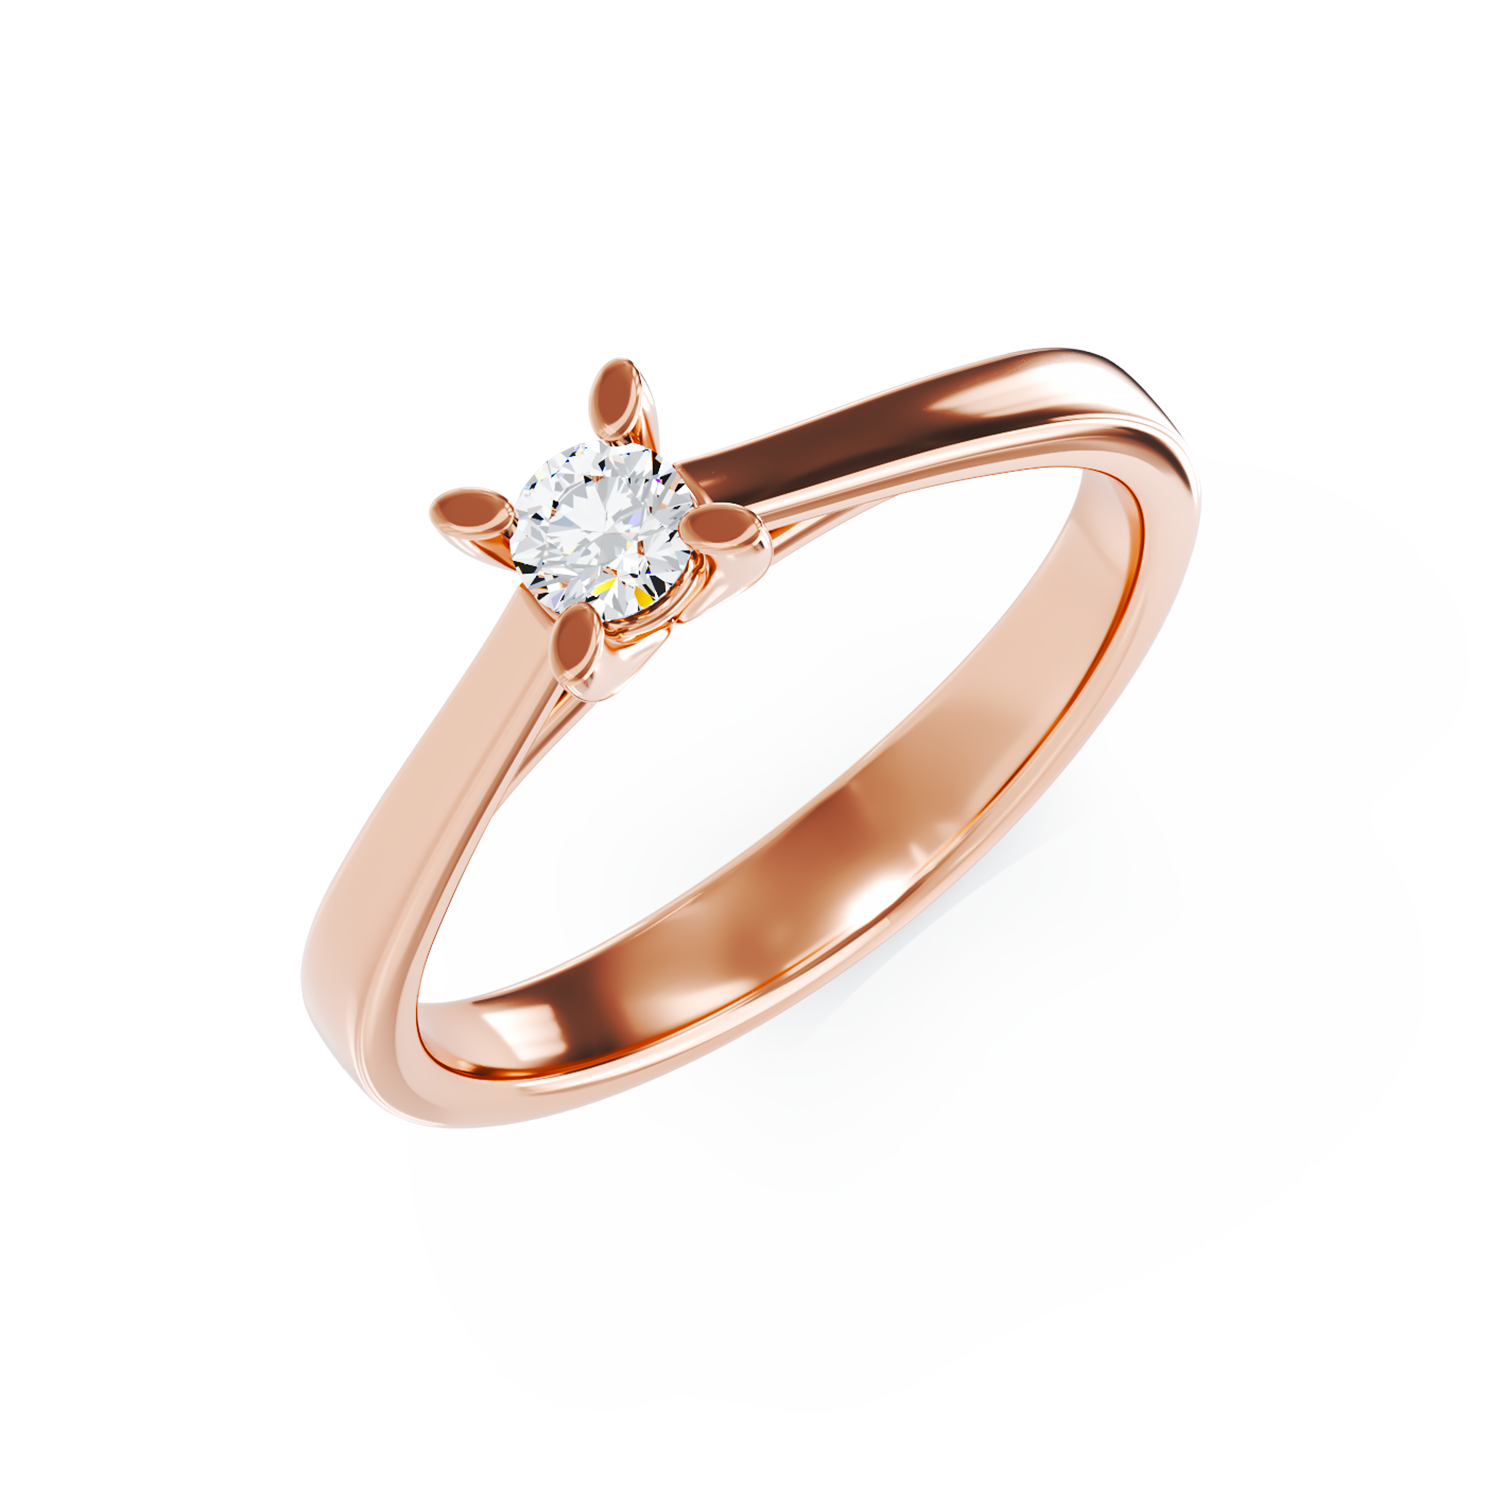 18K rose gold engagement ring with 0.1ct diamond